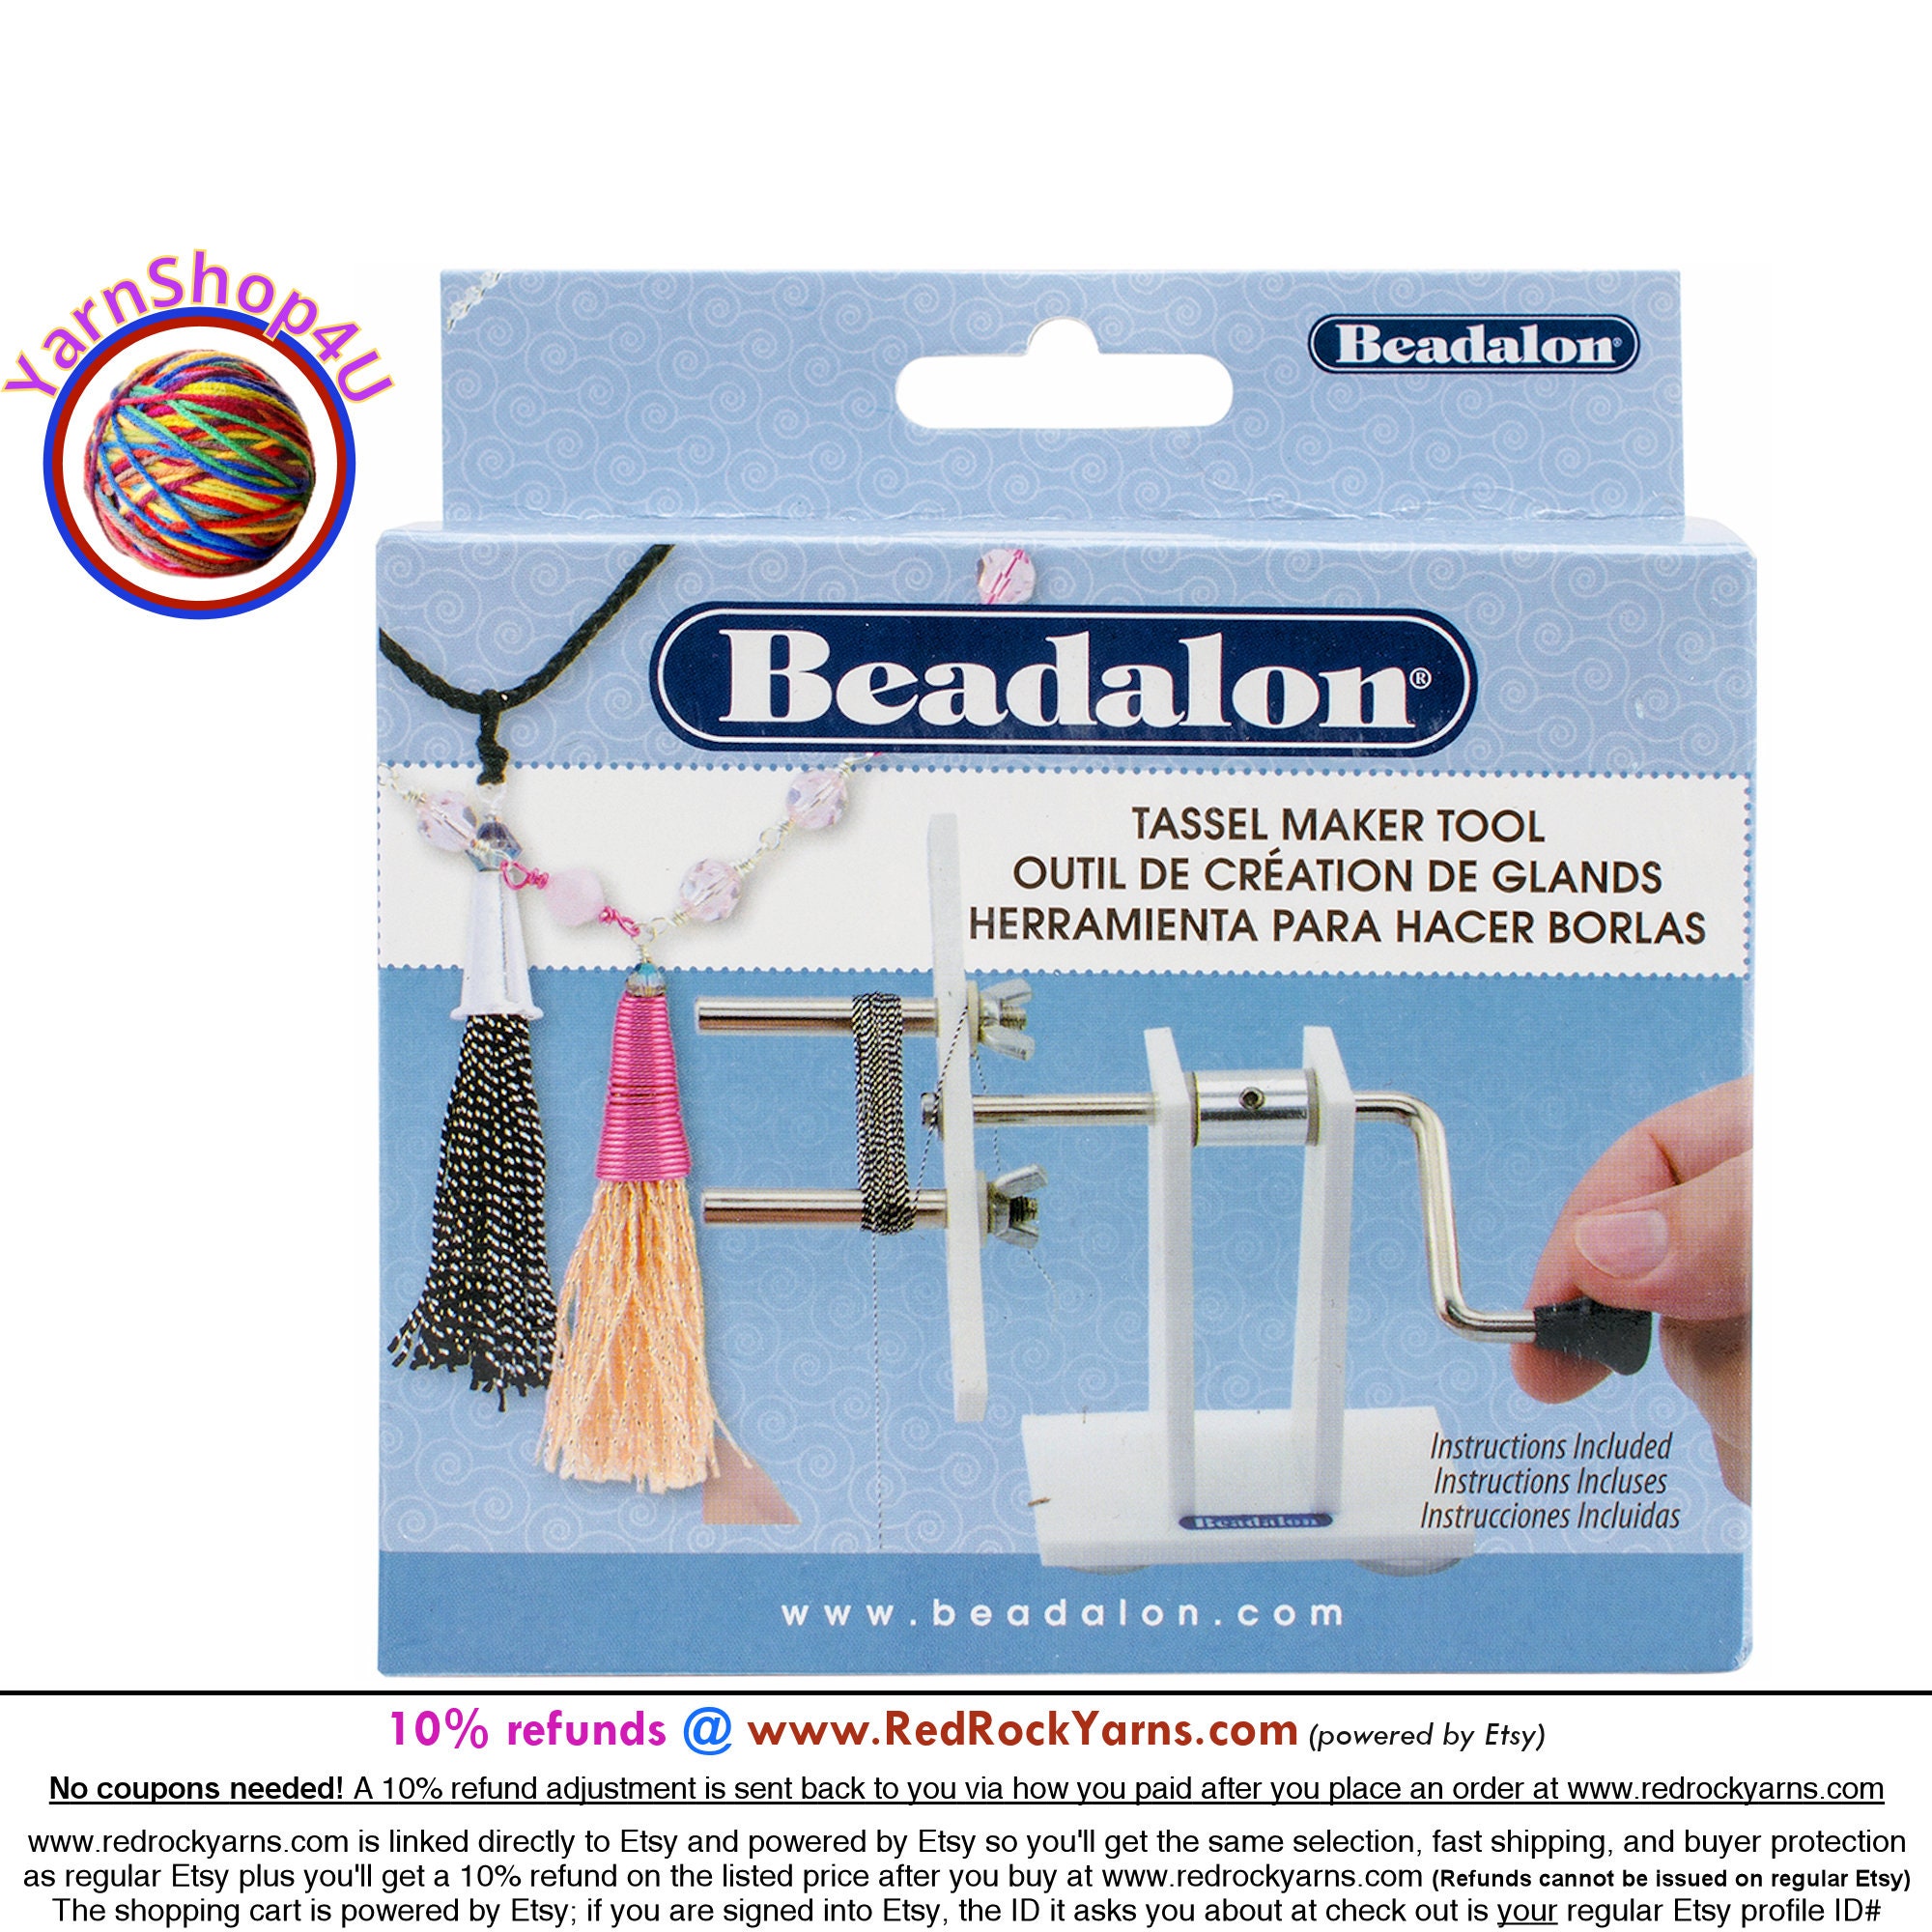 Beadalon Tassel Maker Tool. Makes tassels from about 1 to 3.5